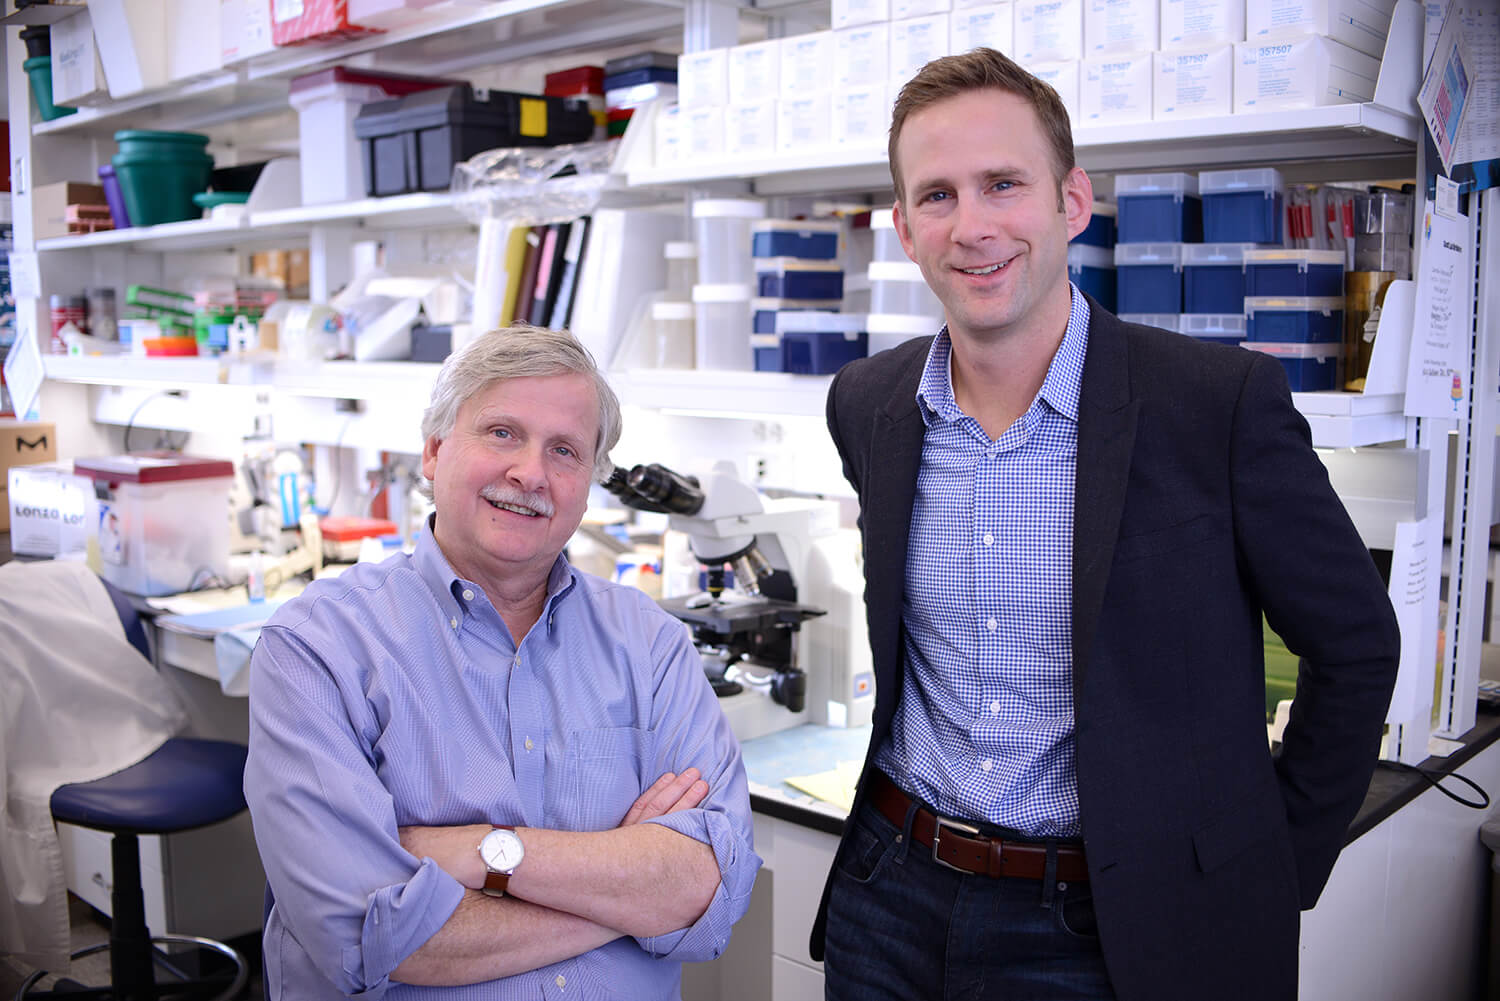 Phillip Scott and Daniel Beiting have collaborated for years on leishmaniasis, employing cutting-edge 